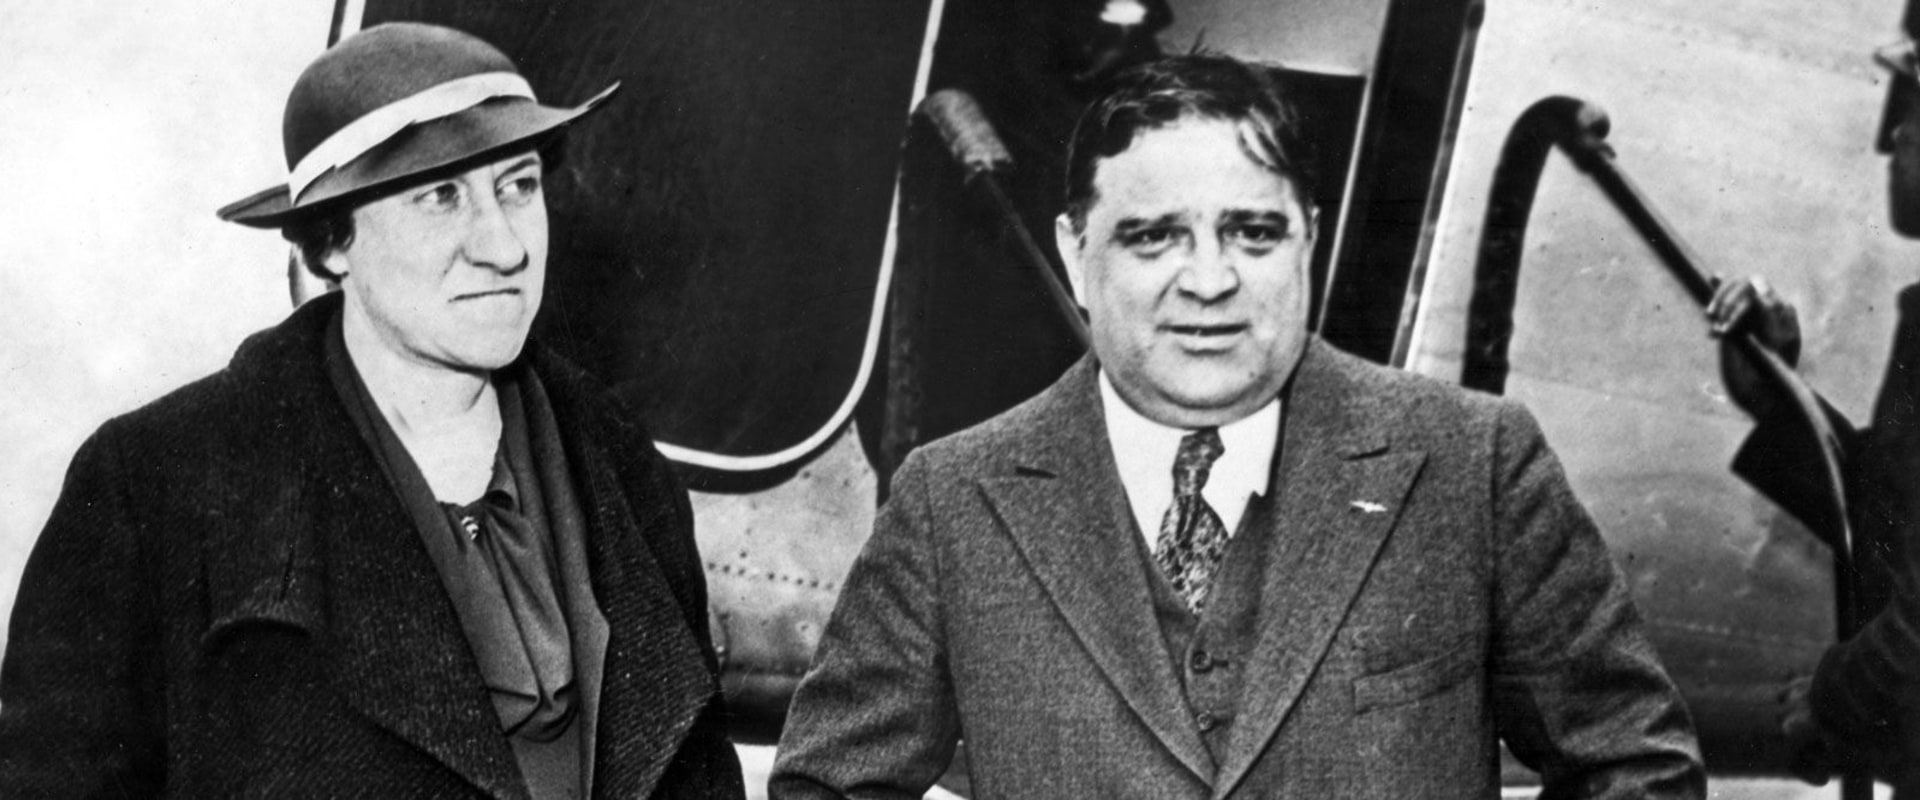 What year did fiorello laguardia become mayor of new york city?